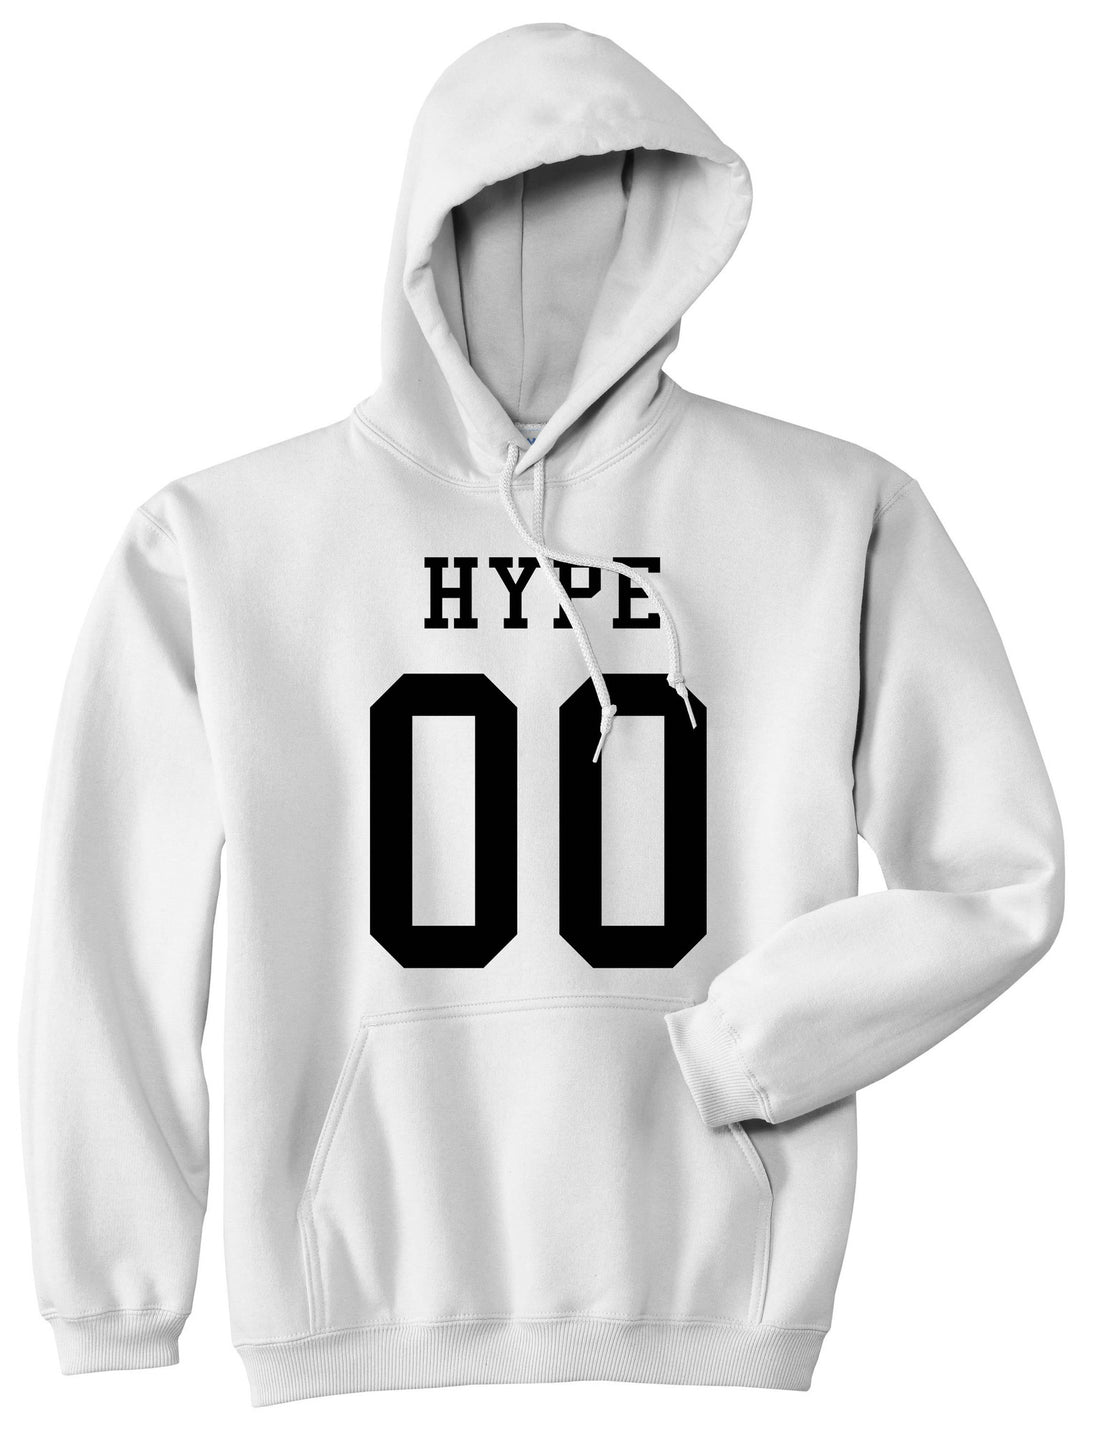 Hype Team Jersey Pullover Hoodie in White By Kings Of NY